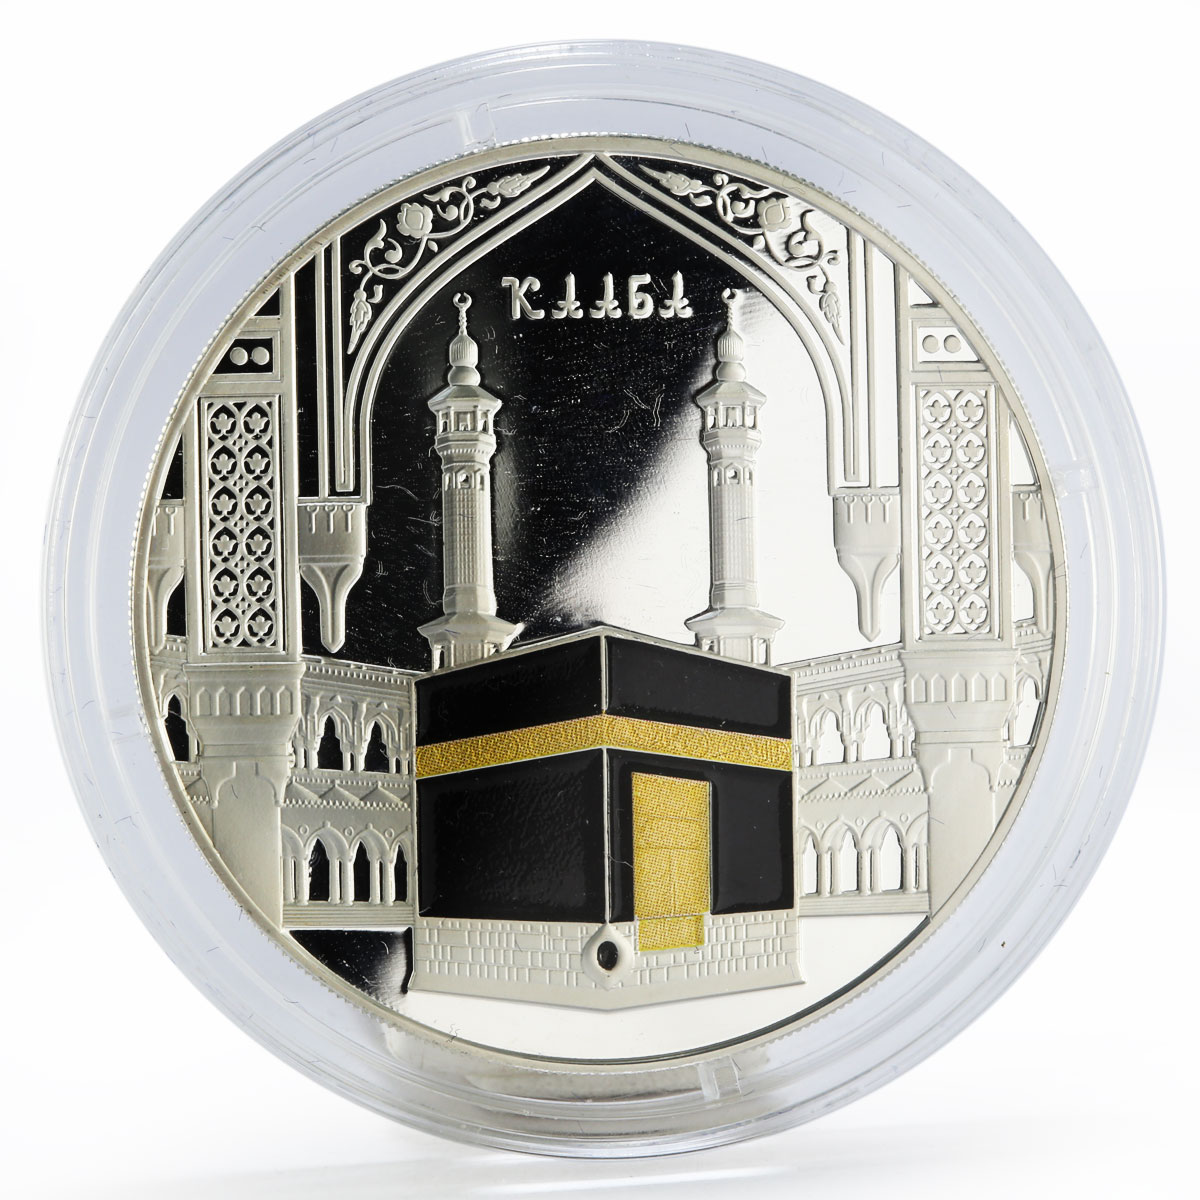 Gabon 2000 franks Kaaba colored proof silver coin 2015